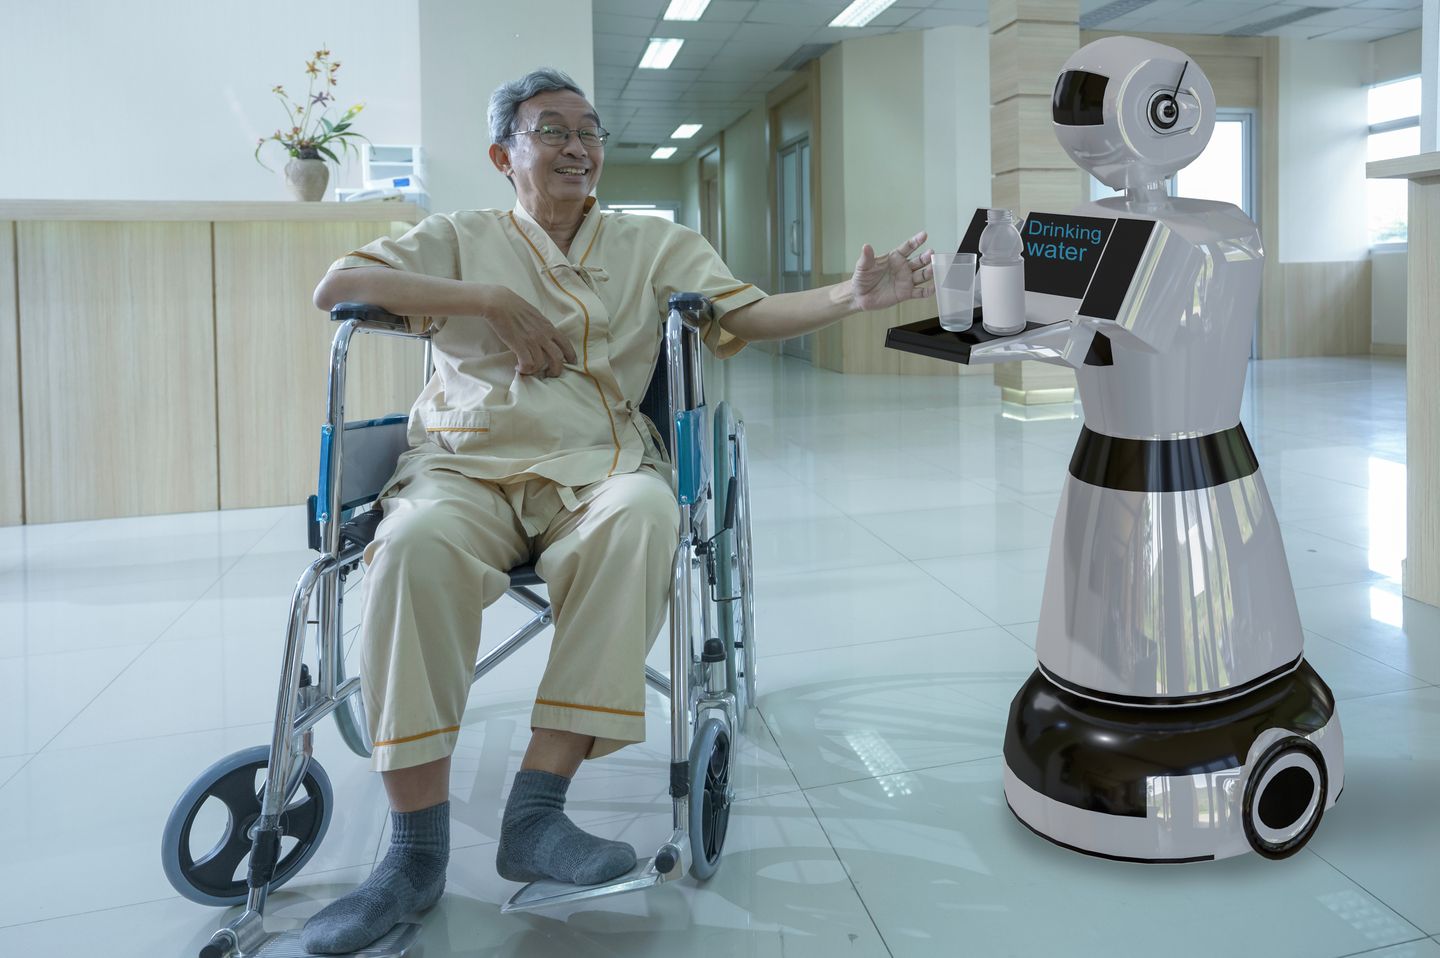 Inside Japan's long experiment in automating eldercare